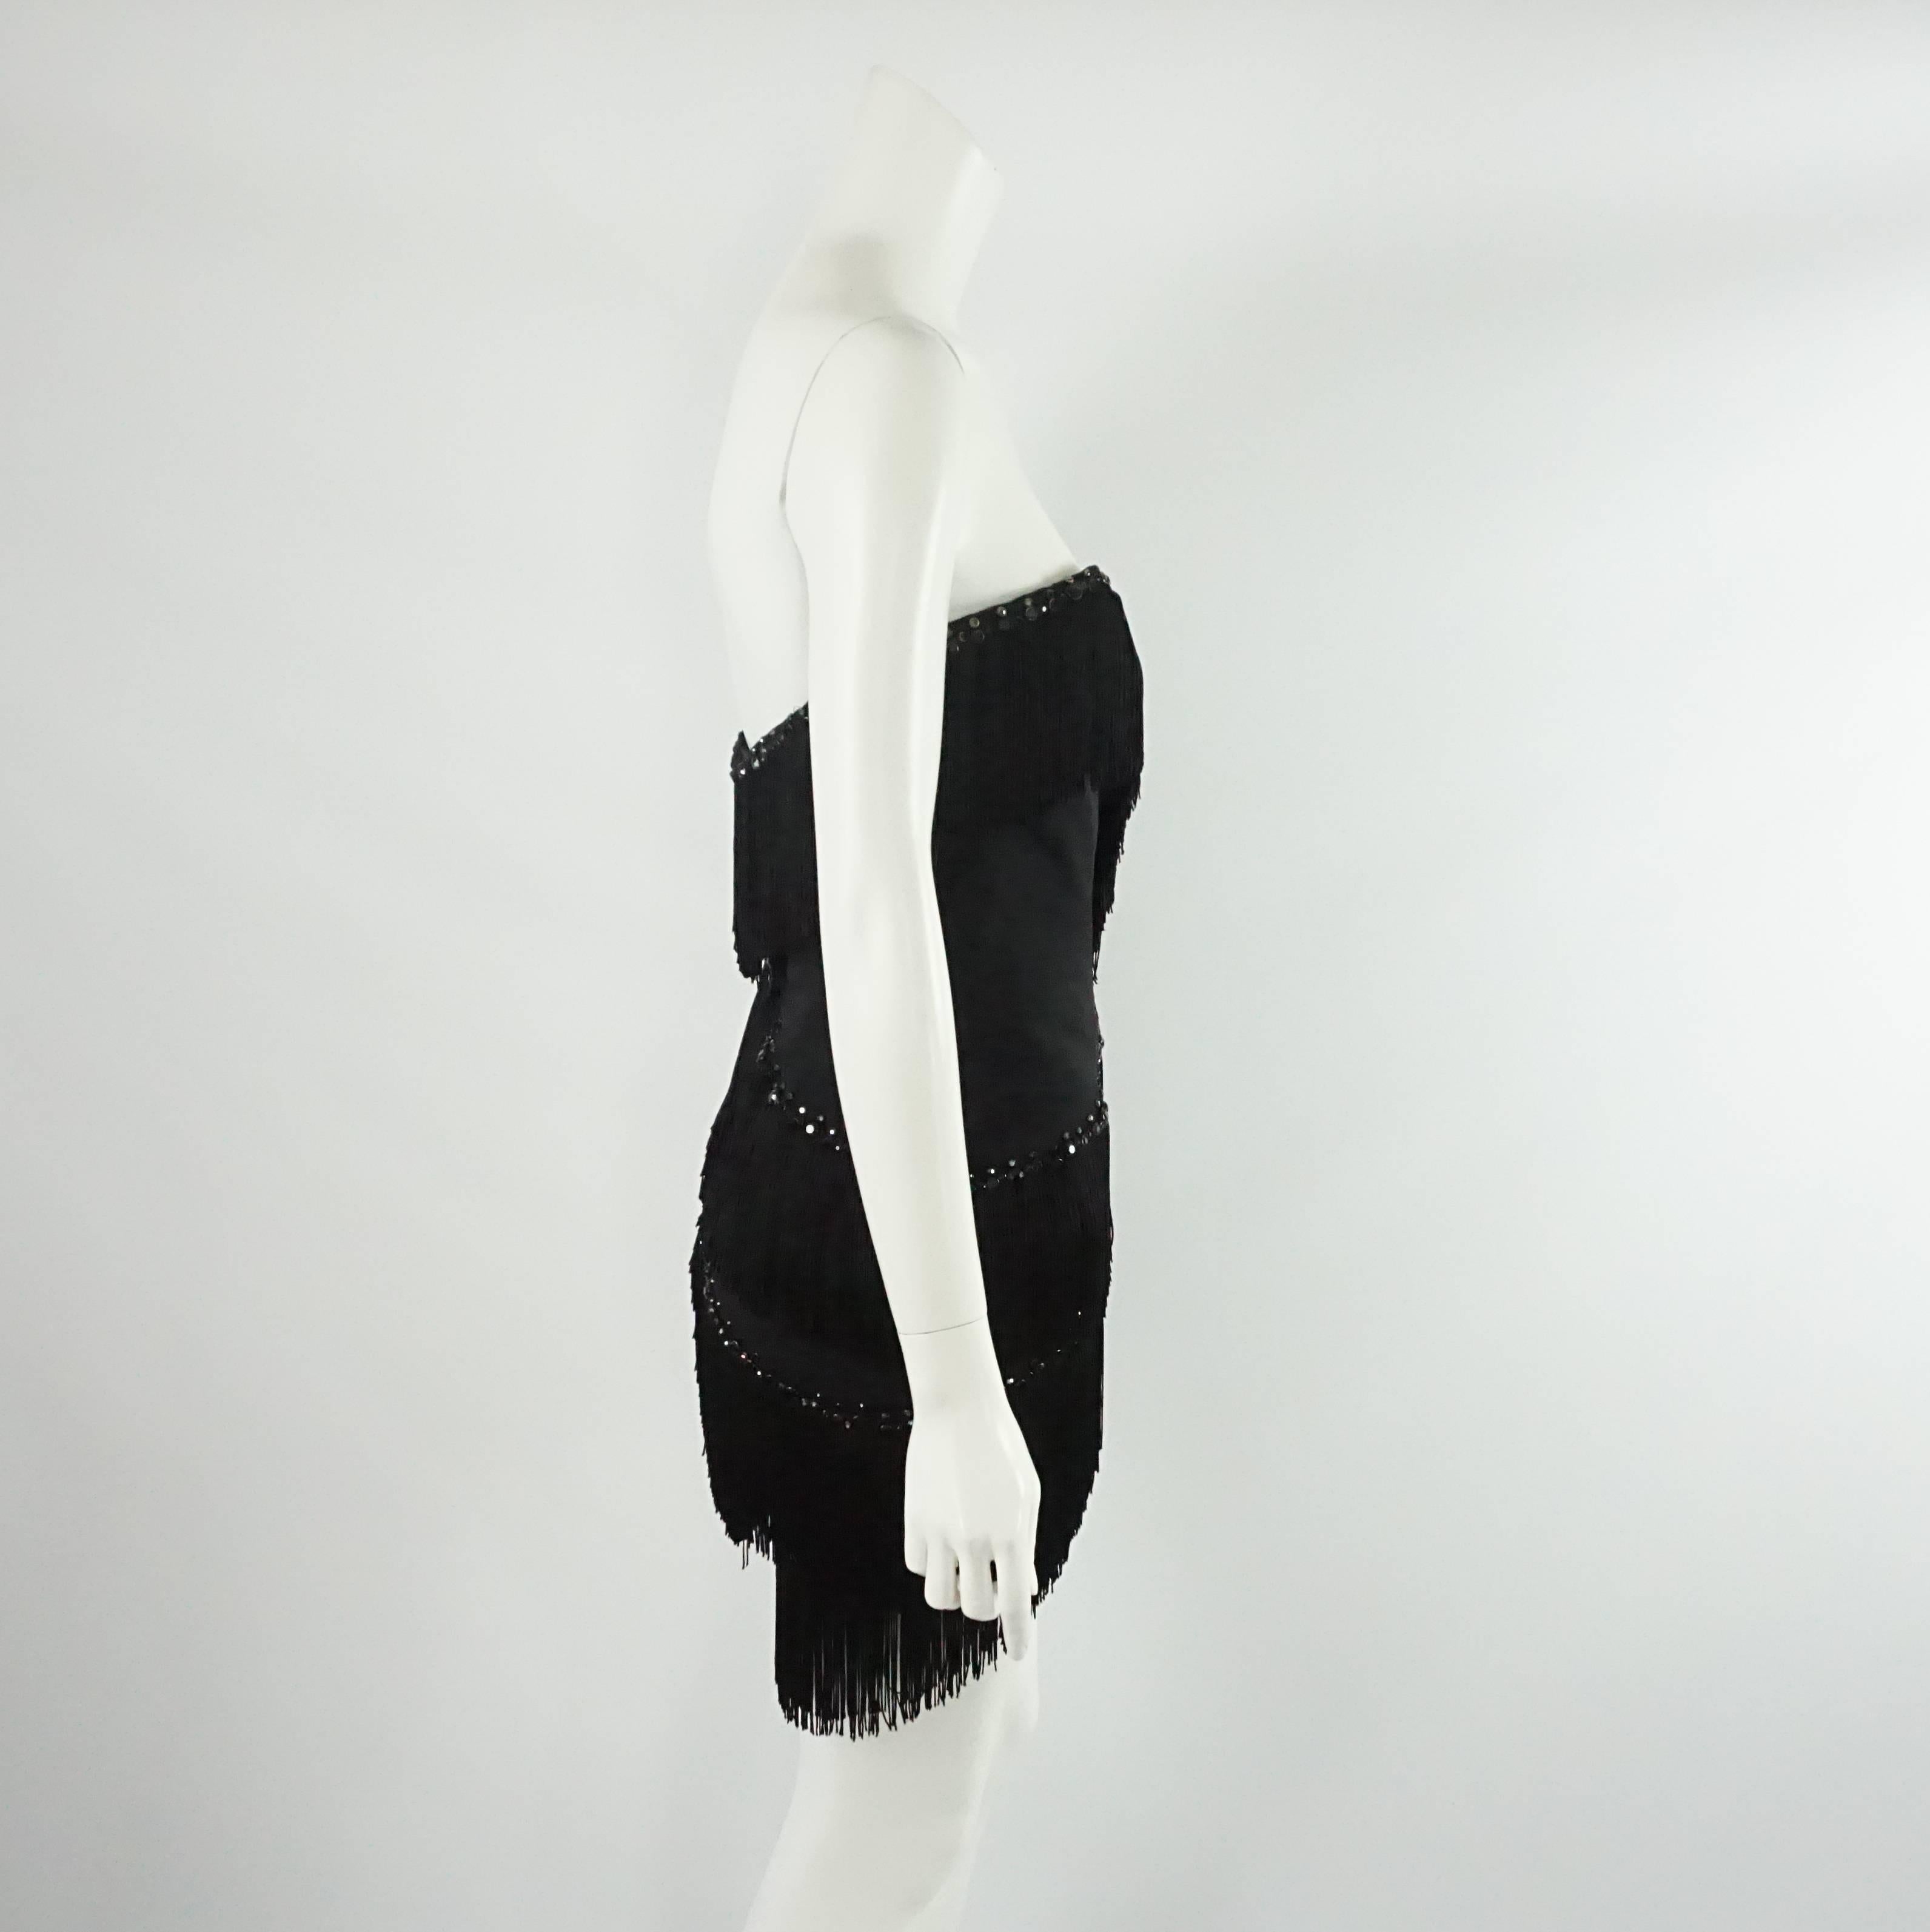 This Bob Mackie vintage dress has a sweet heart neckline and is short with fringes and black rhinestones all over. The dress zips in the back and has boning all along the inside. It is in excellent vintage condition with light wear to the